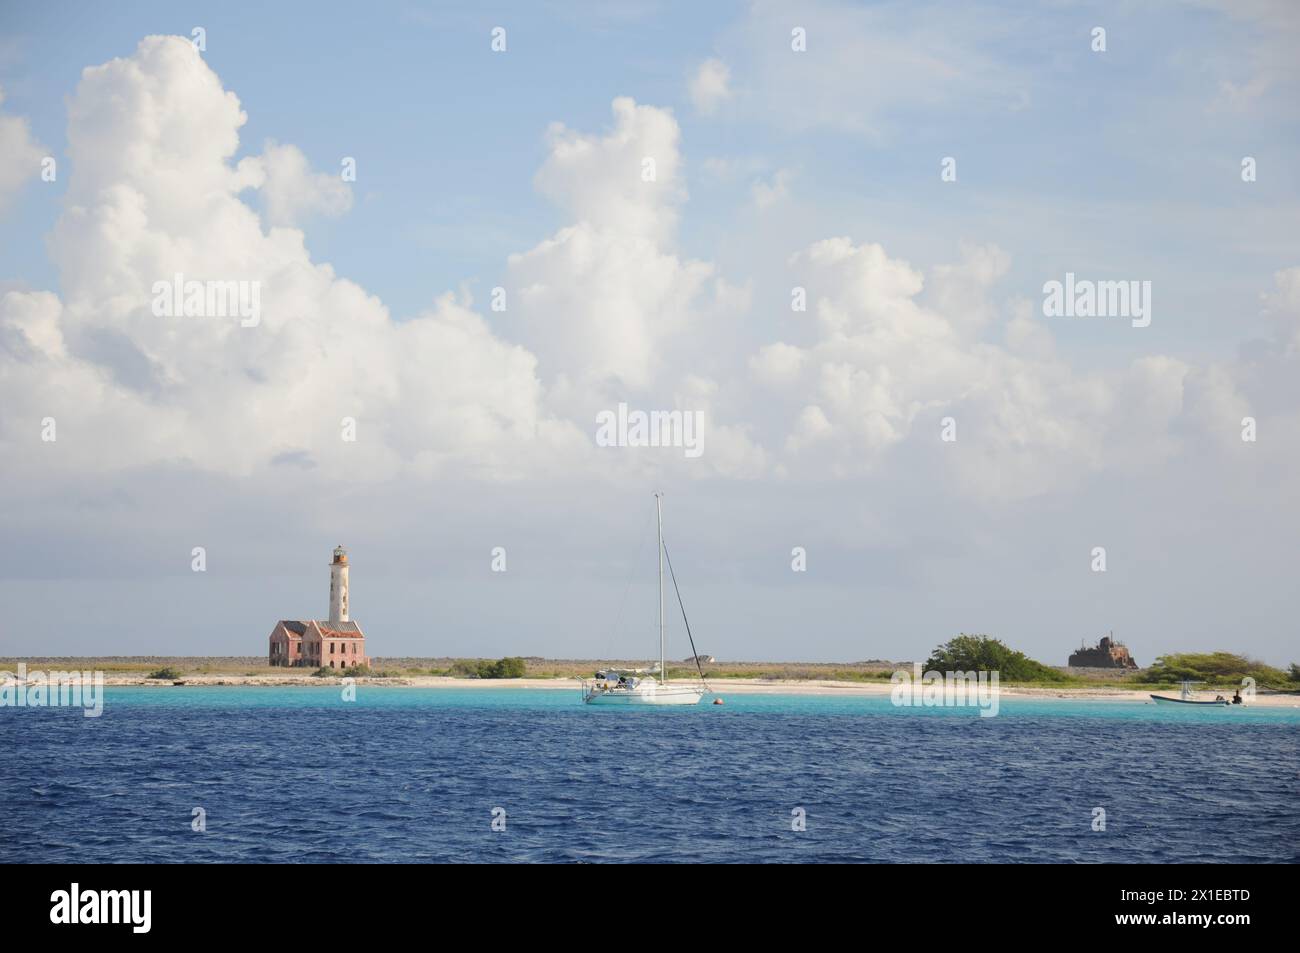 A small sailboat is floating in the ocean near a lighthouse. The sky is cloudy, but the water is calm and blue Stock Photo